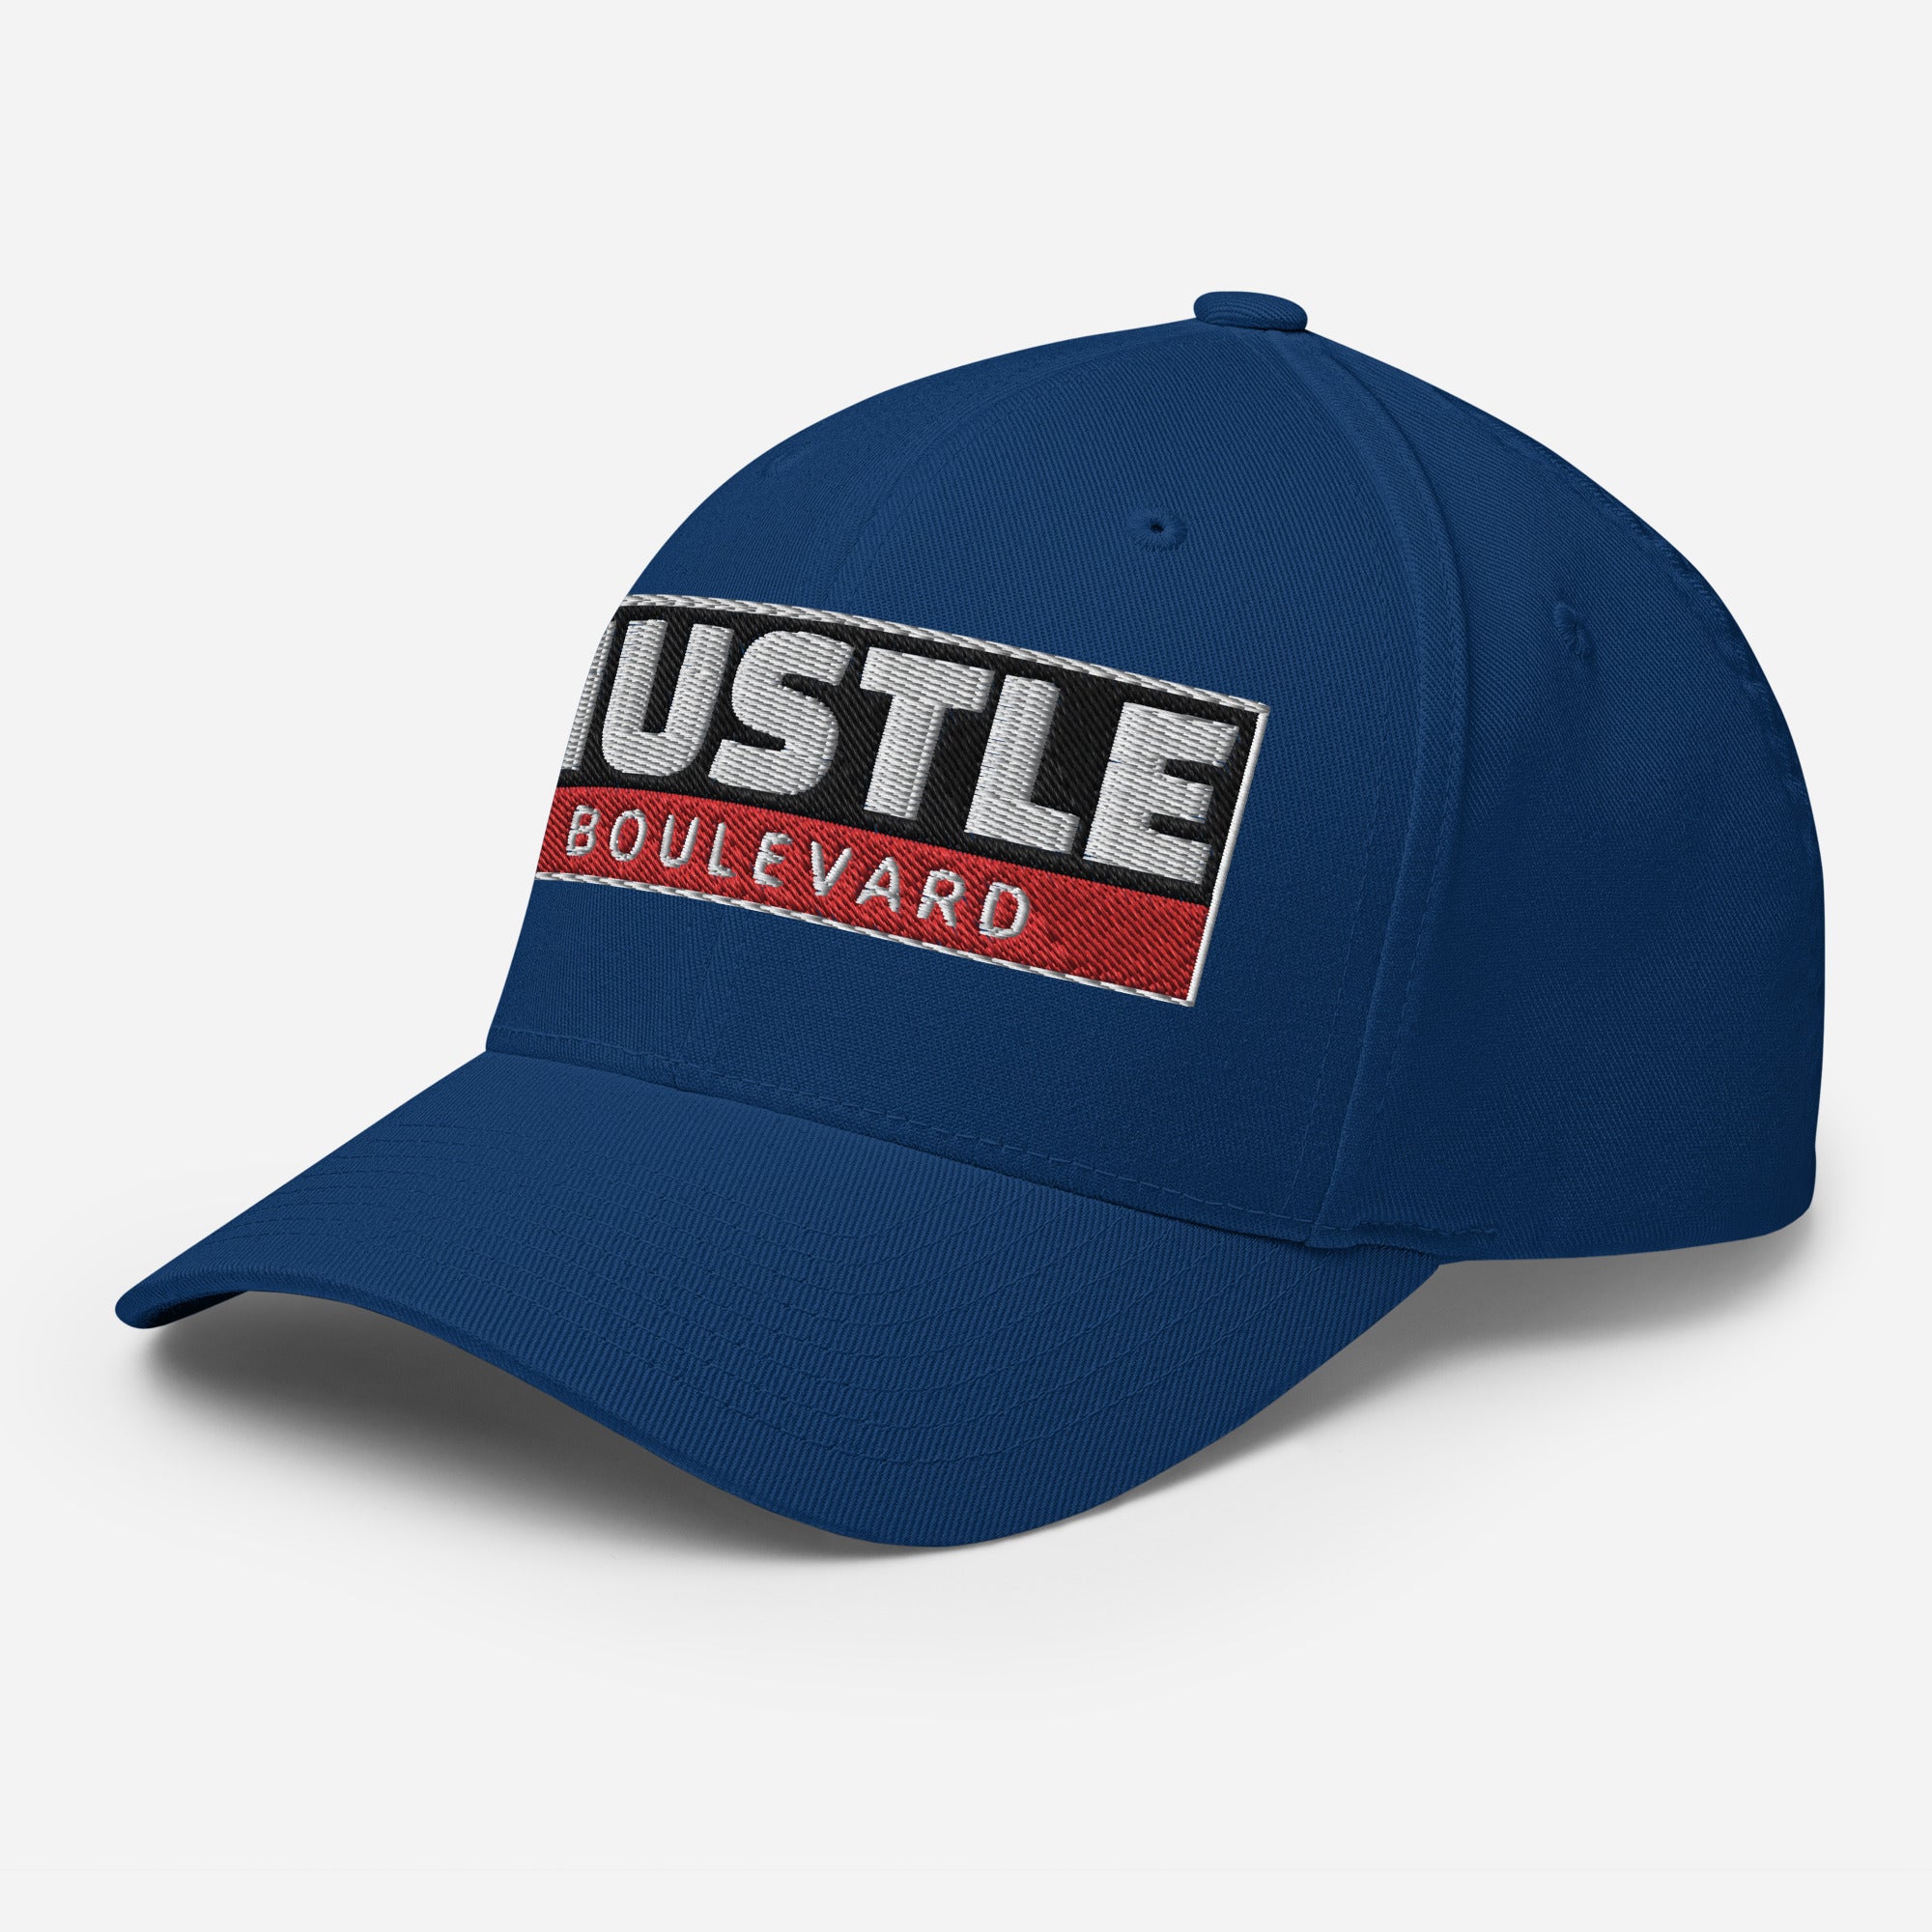 HUSTLE HORIZON RBW : Closed Back FlexFit Style Structured Twill Cap